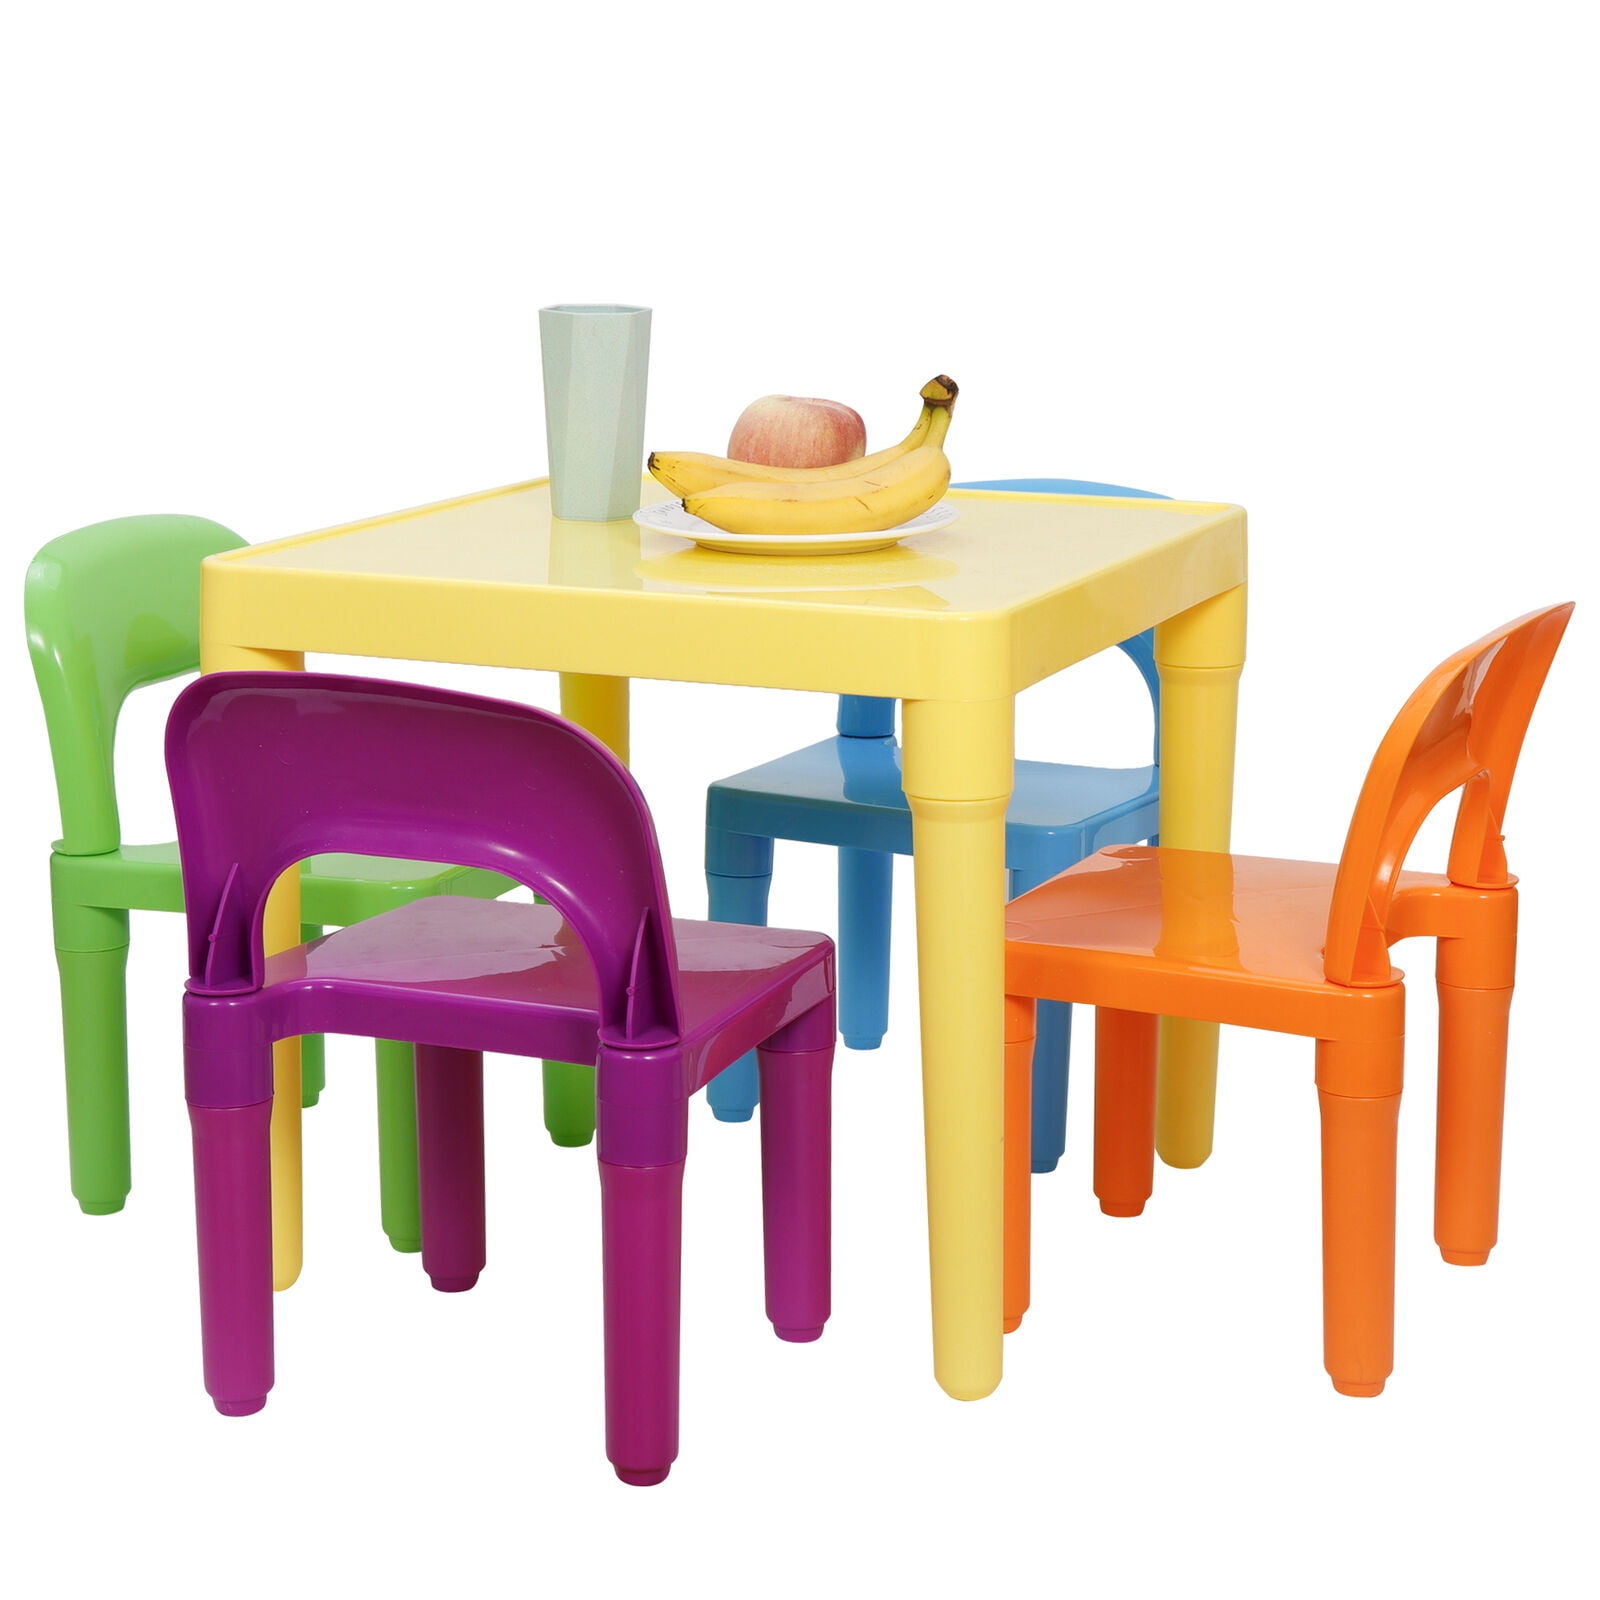 New Preschool Table For Kids With 4 Vibrant Color Chair Outdoor Indoor Playset 